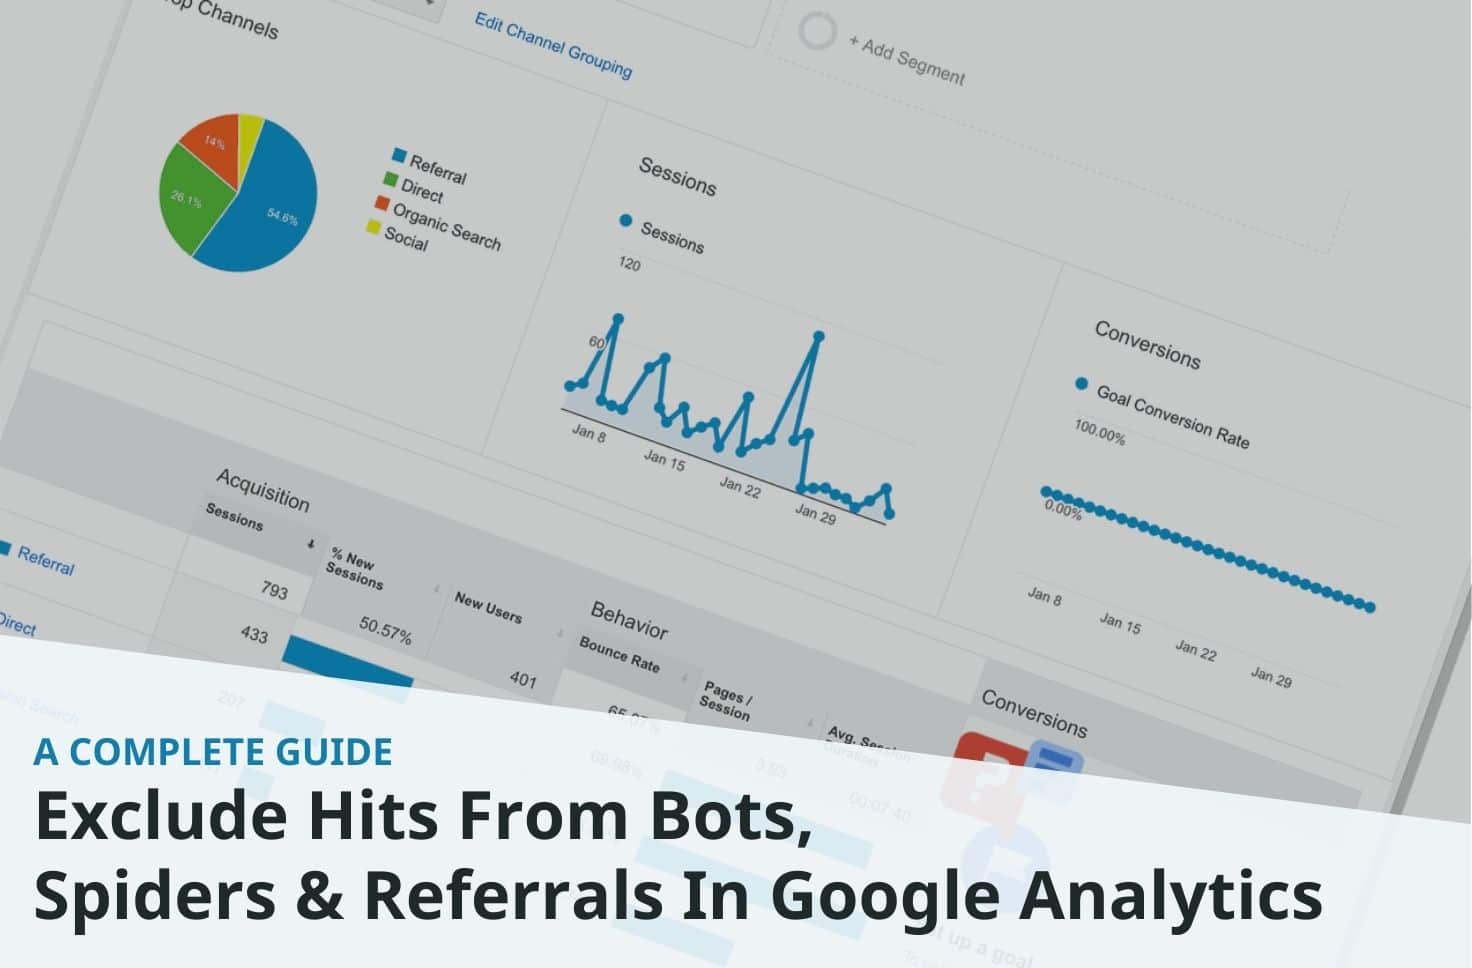 Exclude Hits From Bots, Spiders & Referrals In Google Analytics